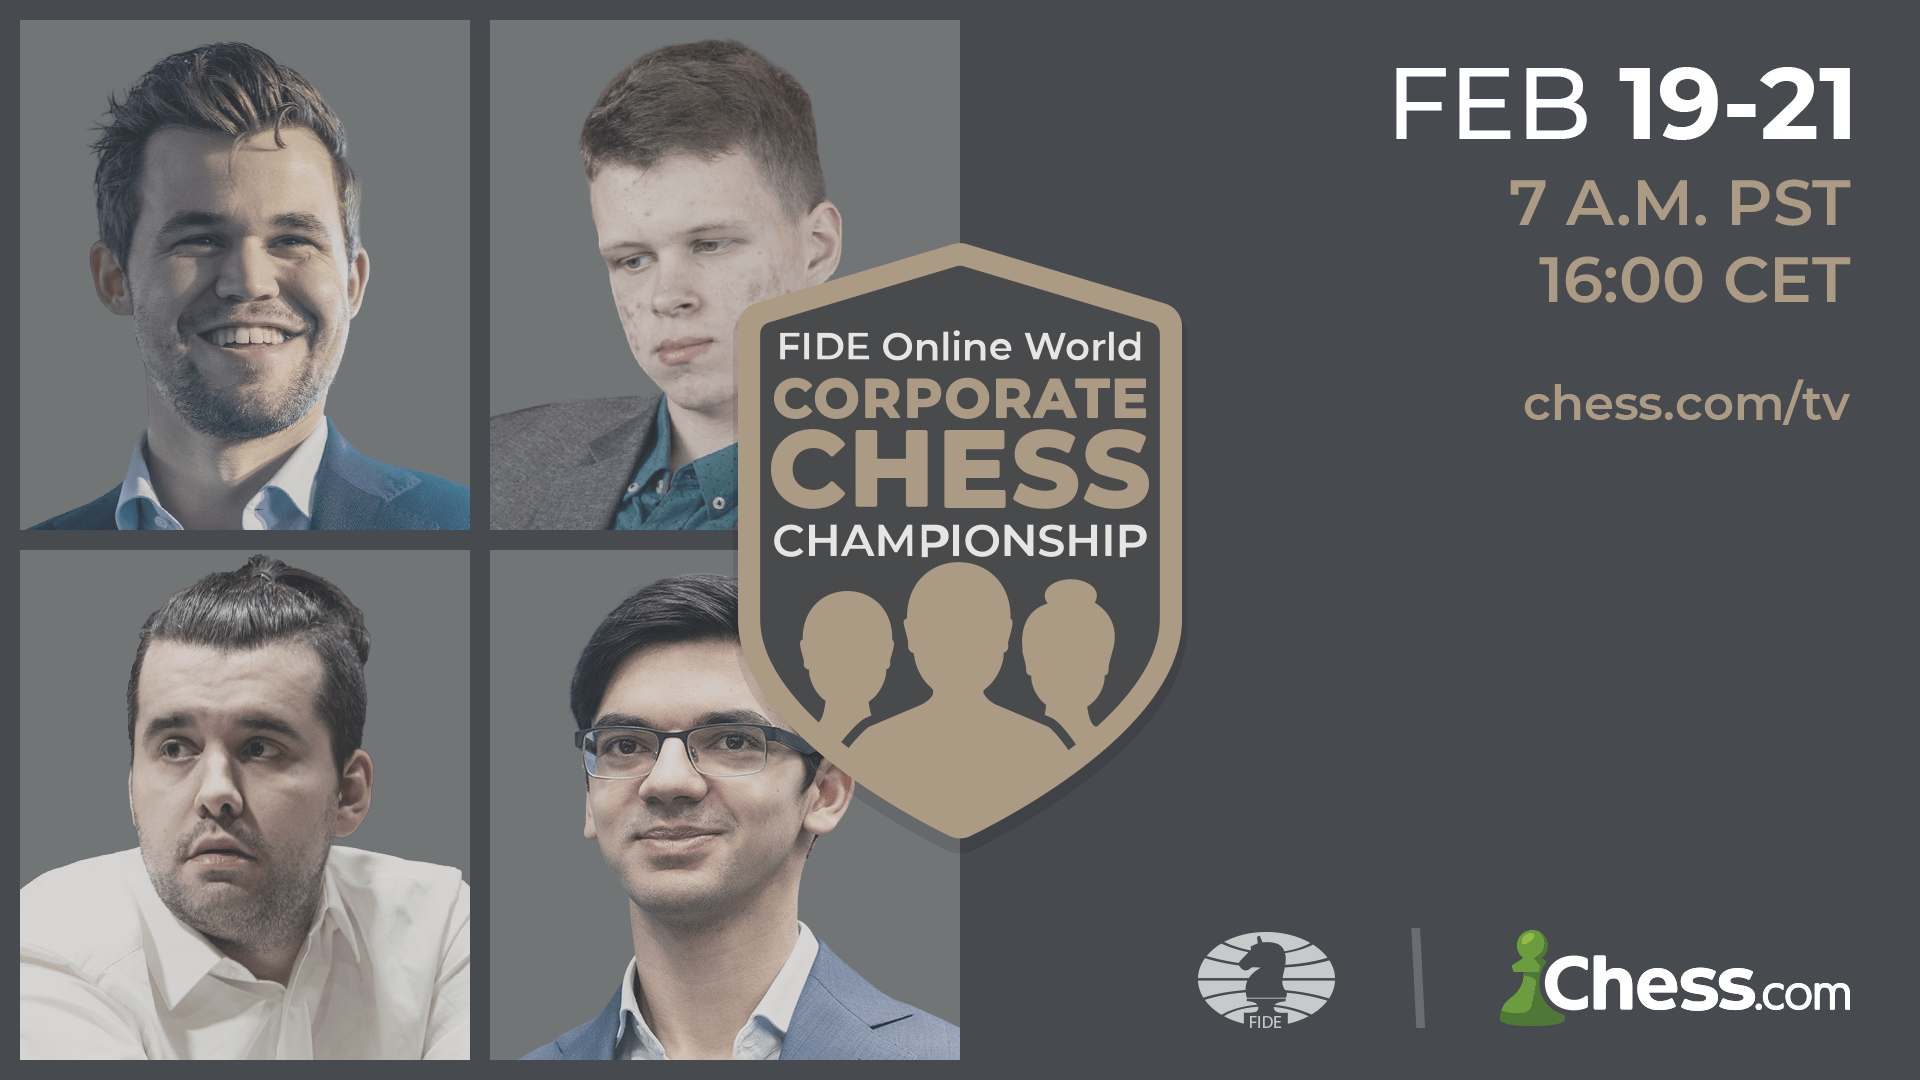 First FIDE Online World Corporate Chess Championship announced